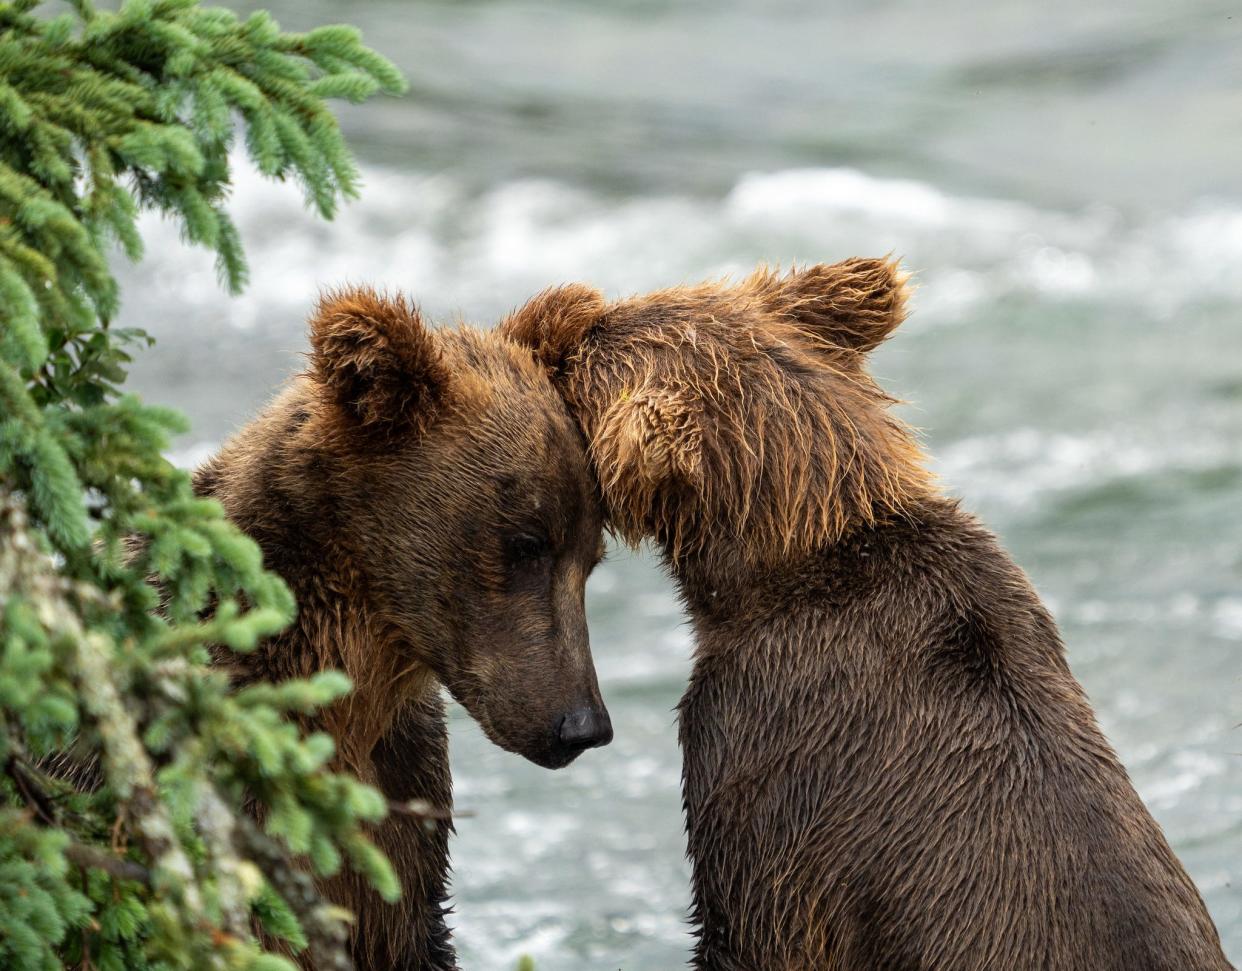 Bear 909 Jr. and Bear 910 Jr. are actually cousins. Their moms, Bear 909 and Bear 910, are sisters, but Bear 910 adopted her niece in a rare move, according to Katmai National Park and Preserve